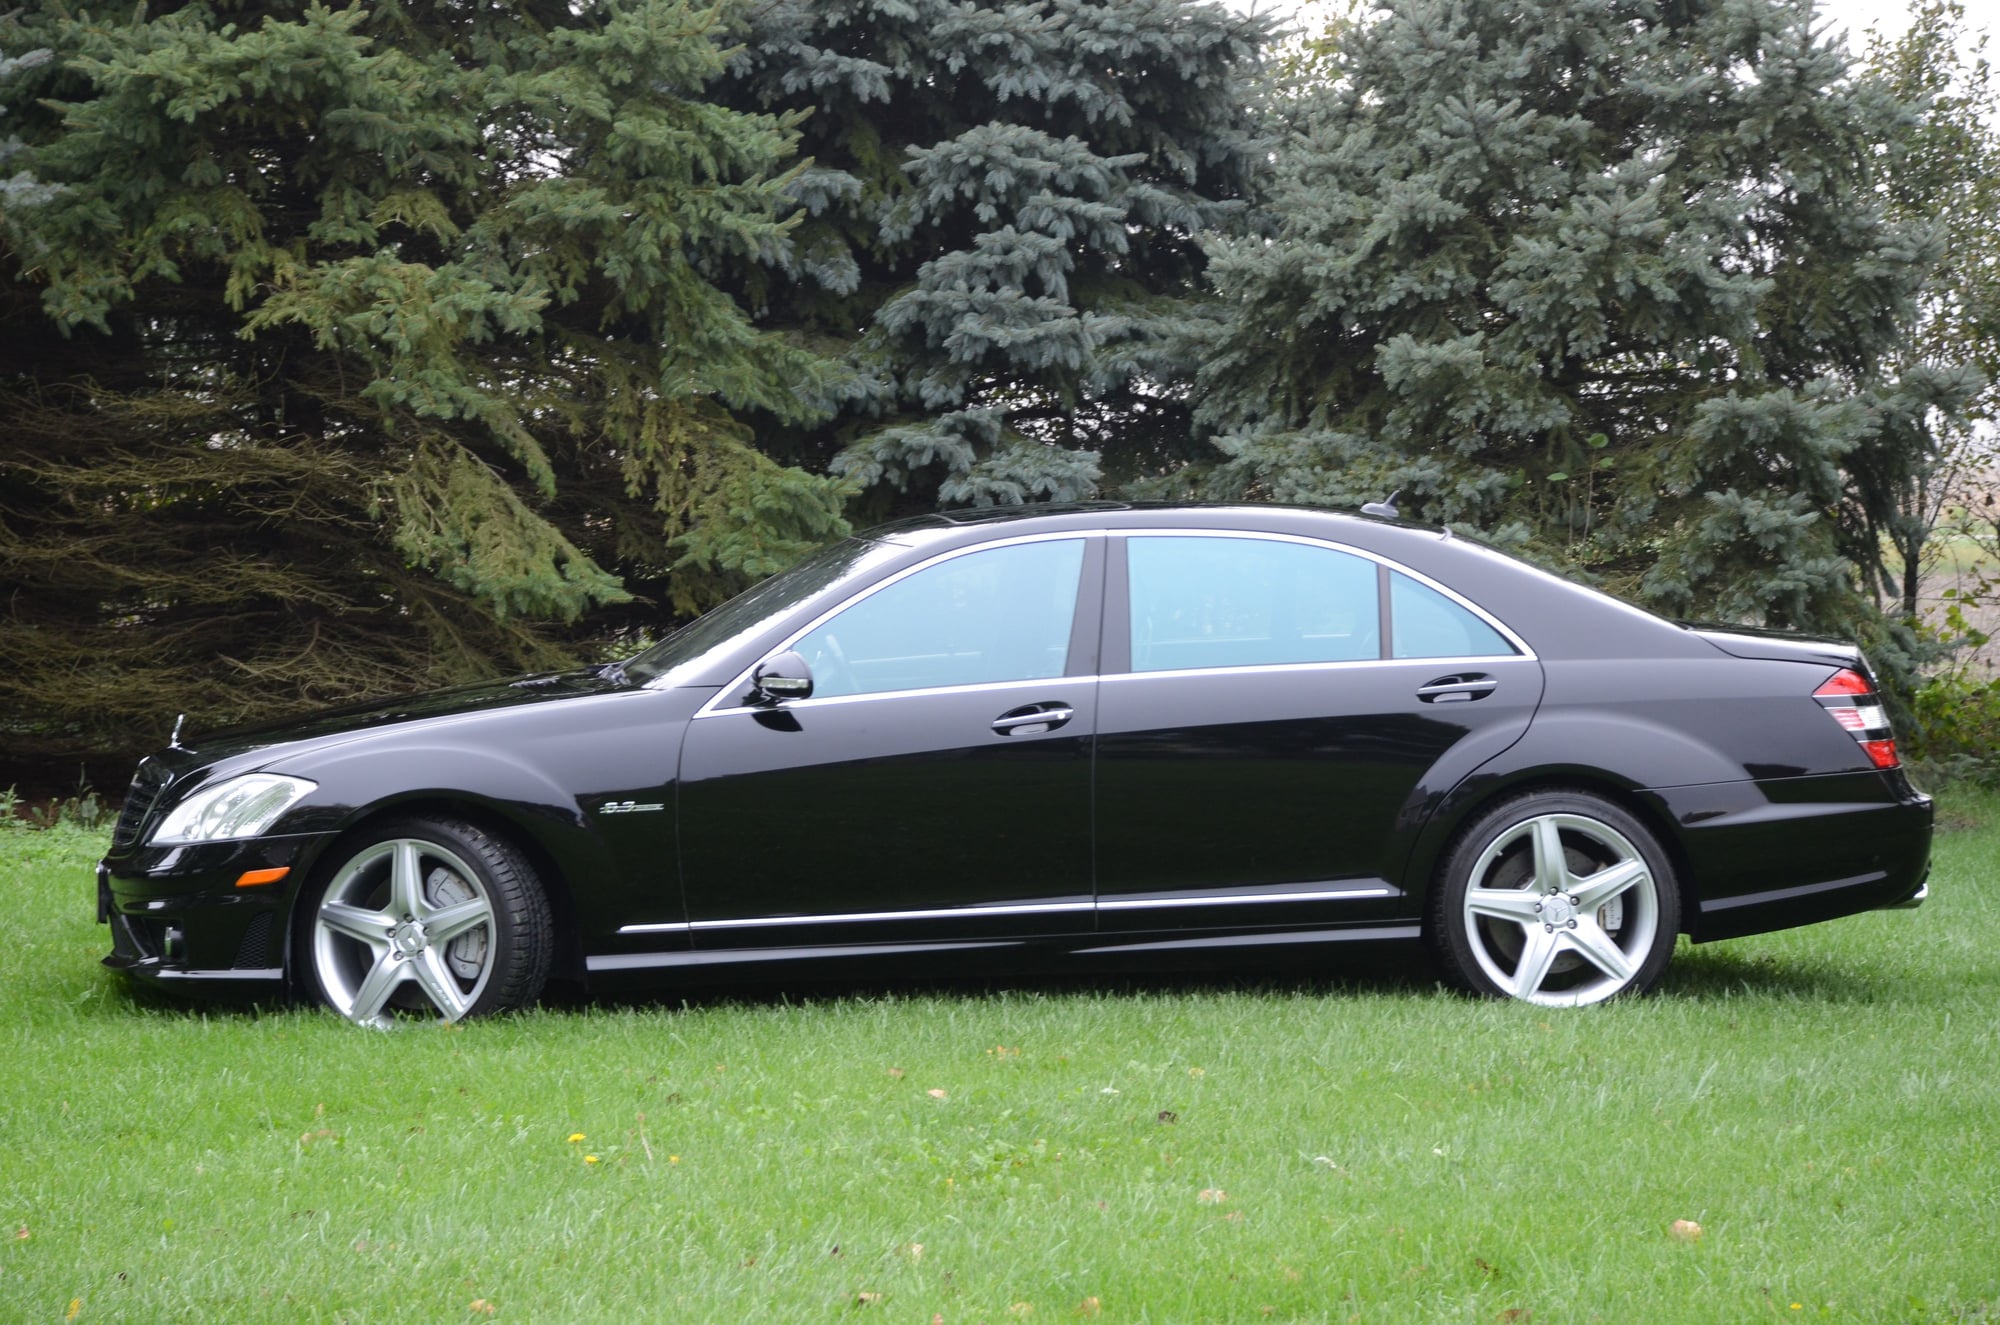 2008 Mercedes-Benz S63 AMG - 2008 Mercedes S63 2nd- Owner W221 All OEM Original - Used - VIN WDDNG77X48A154350 - 8 cyl - 2WD - Automatic - Sedan - Black - Southwest Chicagoland, IL 60935, United States